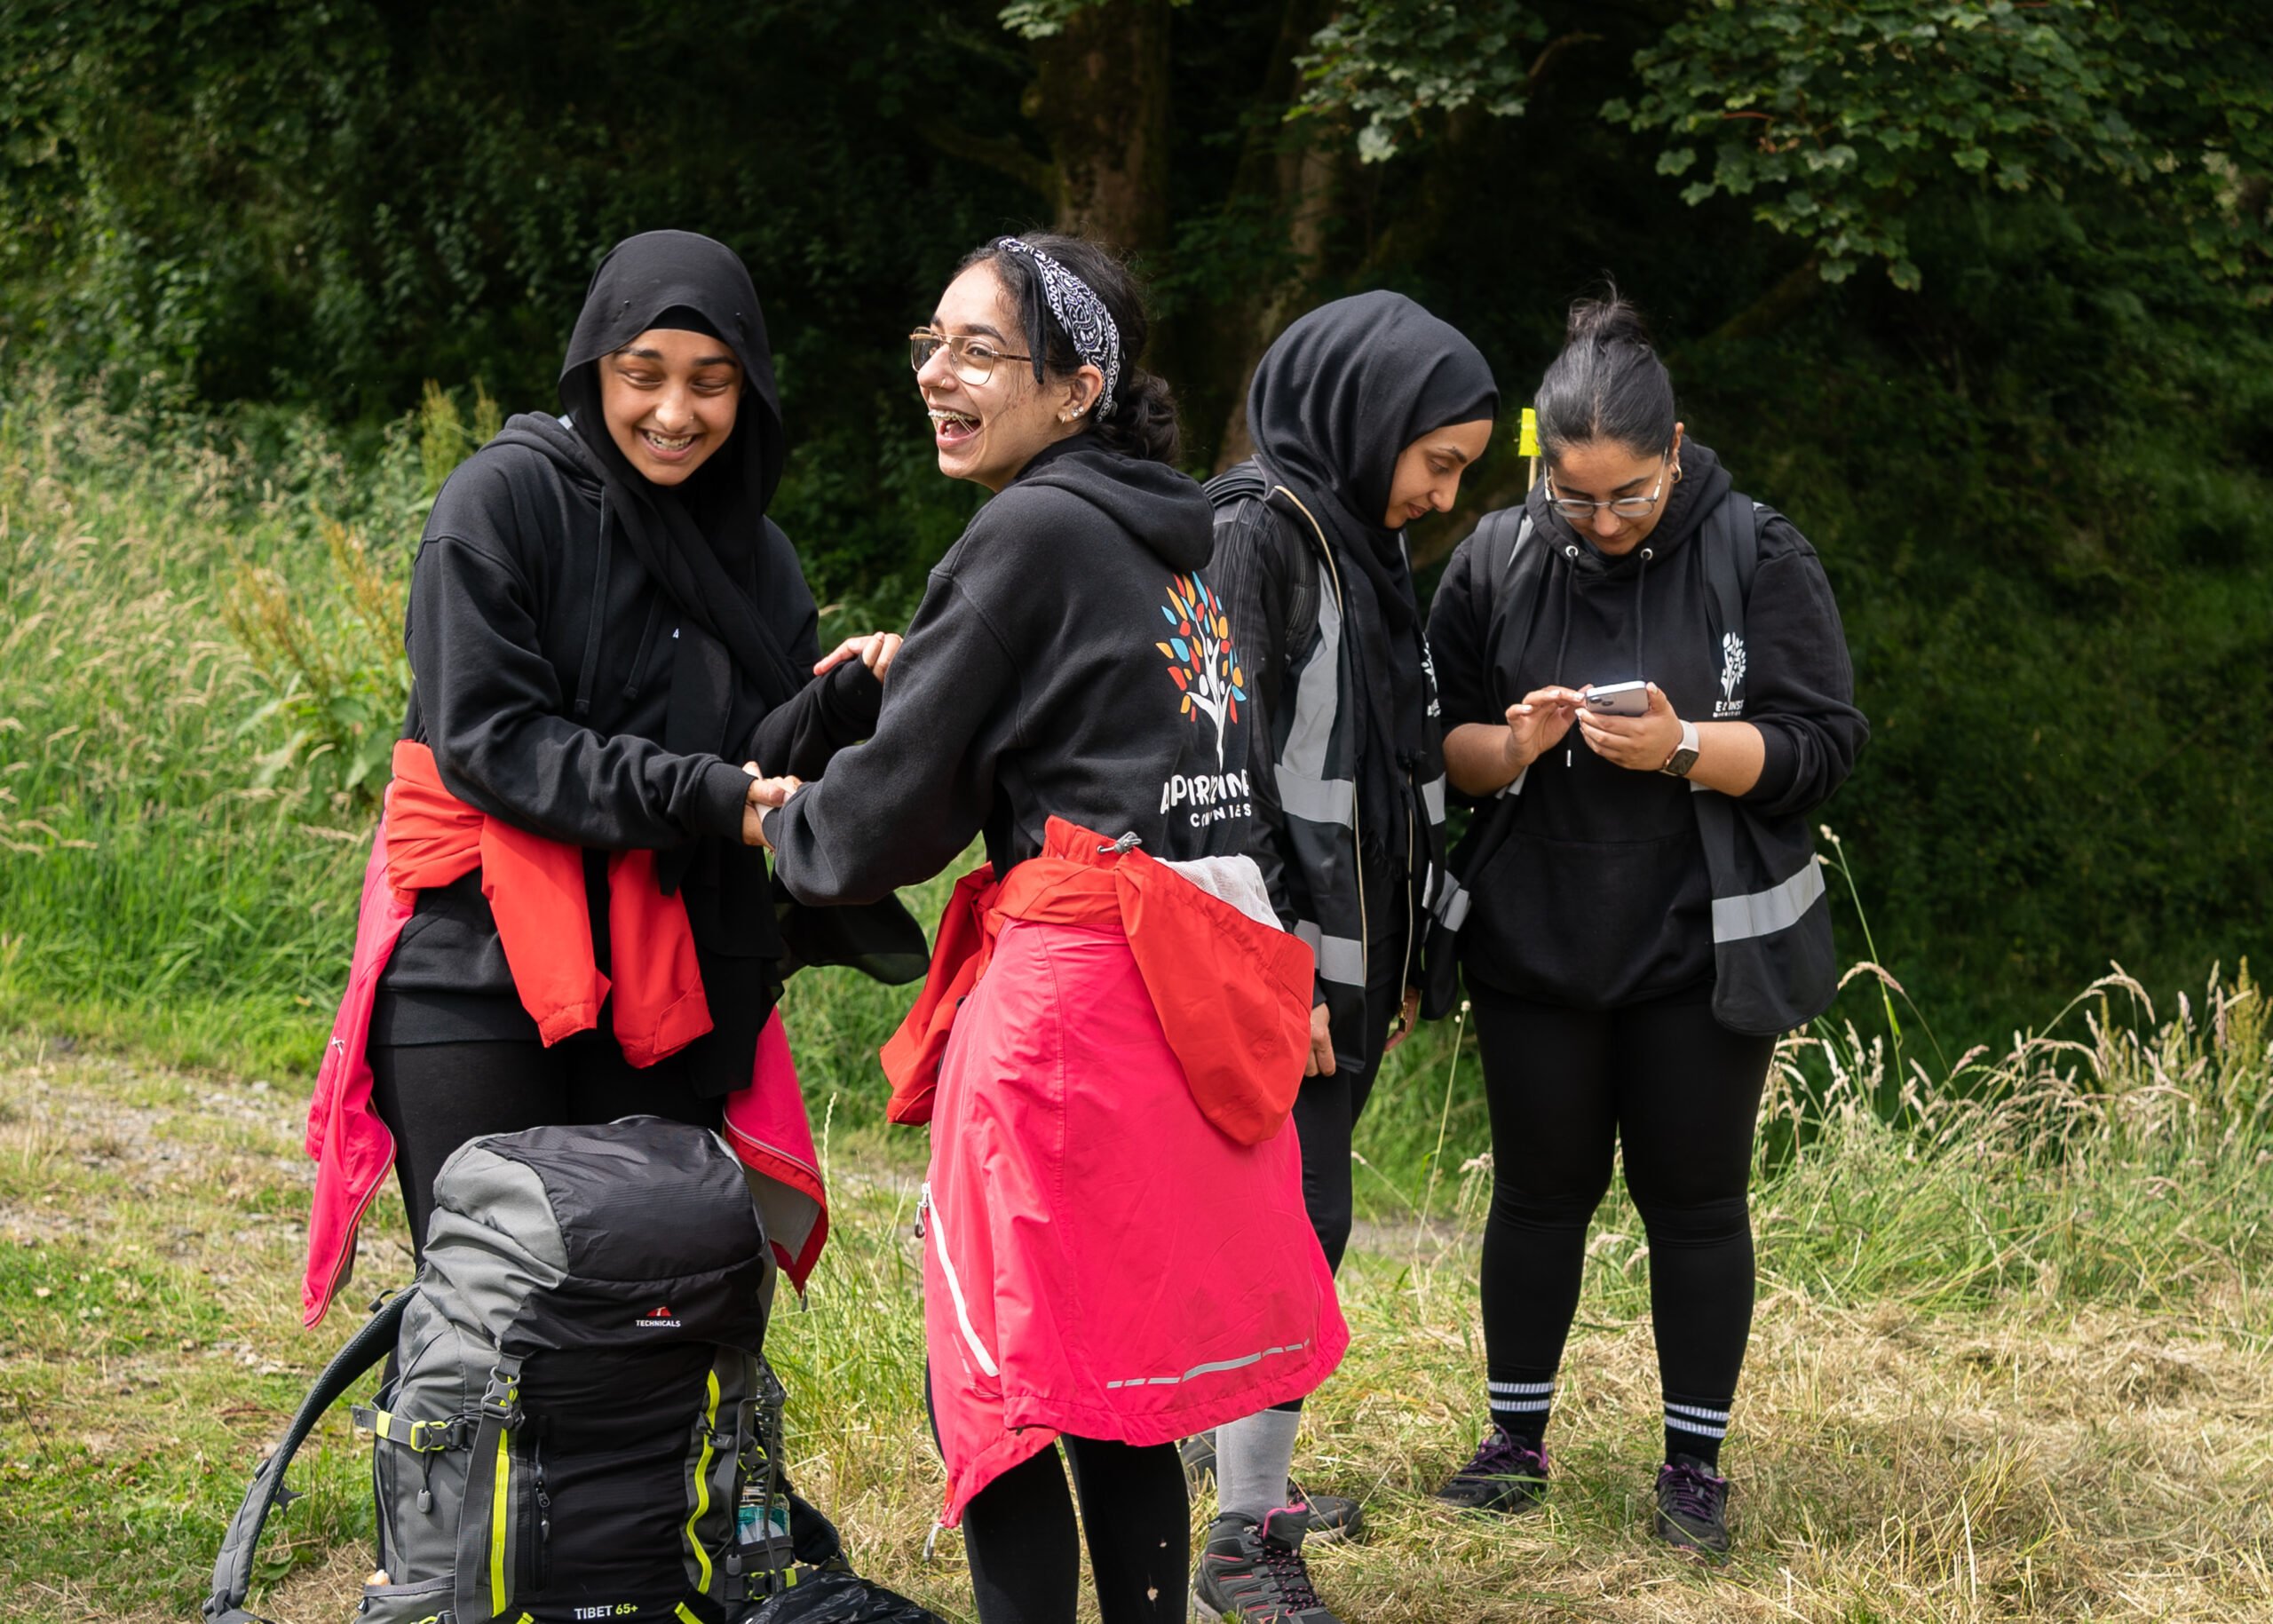 Four young people outside laughing together. They are all wearing rucksacks and hiking gear, 2 of them are looking at something on a mobile phone.